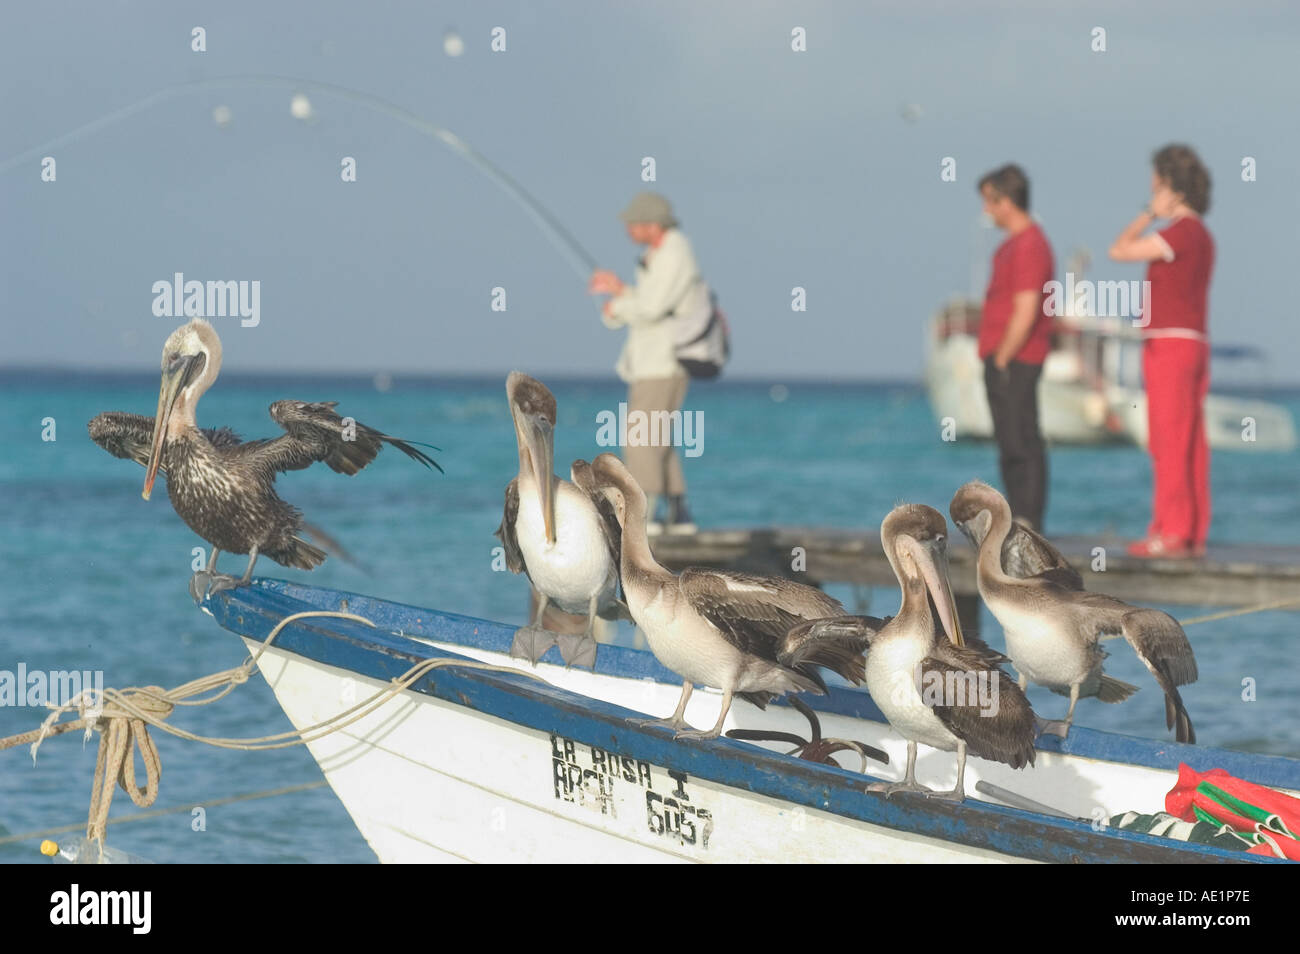 A group of pelicans and fisherman on a sailing boat Los Roques Venezuela South America Stock Photo